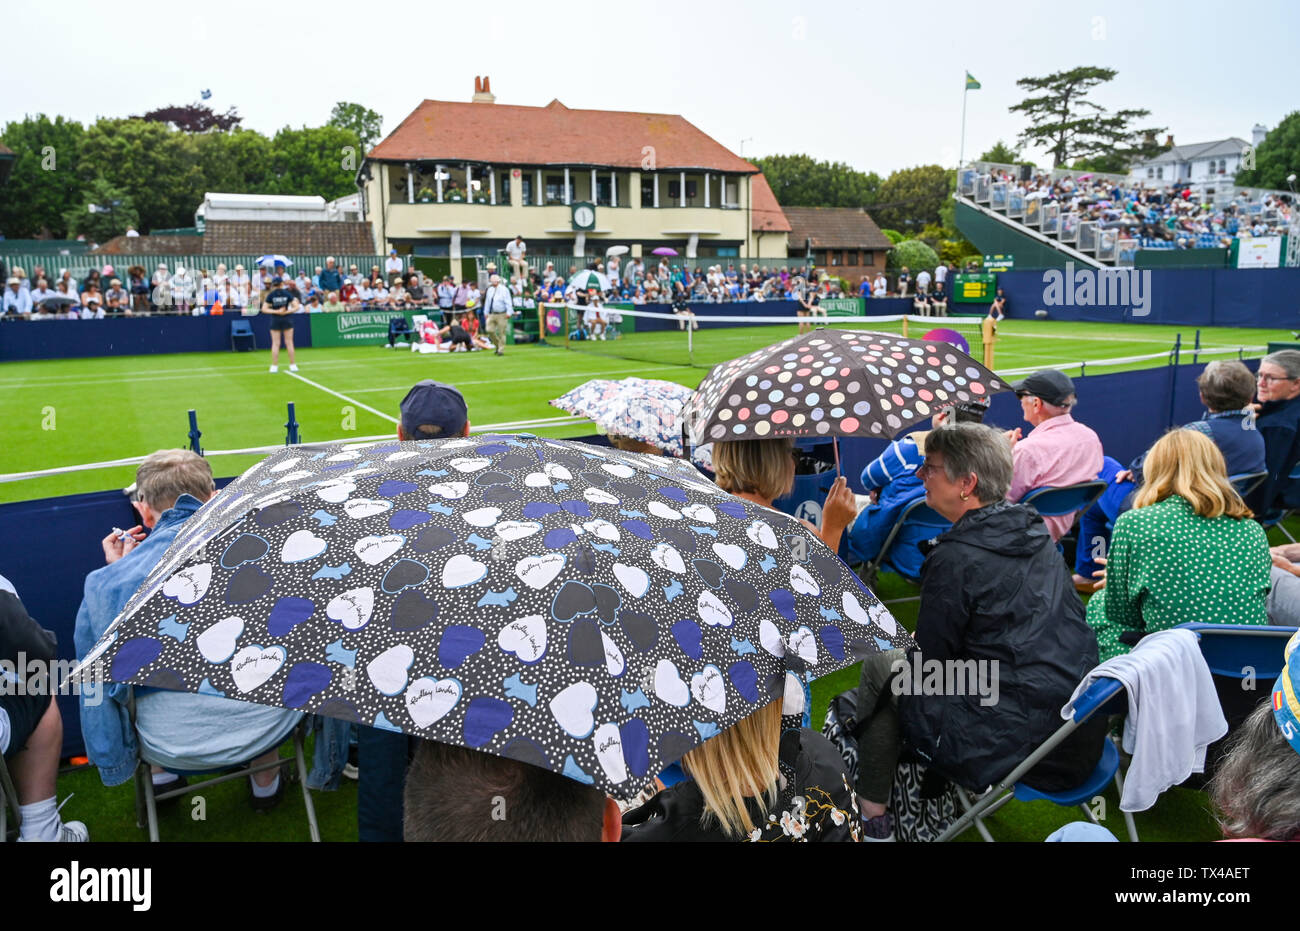 Eastbourne UK 24th June 2019 - The umbrellas come out as rain interrupts play during the Nature Valley International tennis tournament at Devonshire Park in Eastbourne . The forecast is for a heatwave along with thunder storms to arrive in Britain from mainland Europe with temperatures expected to reach the 30s in some parts of the south east. Credit : Simon Dack /TPI / Alamy Live News Stock Photo